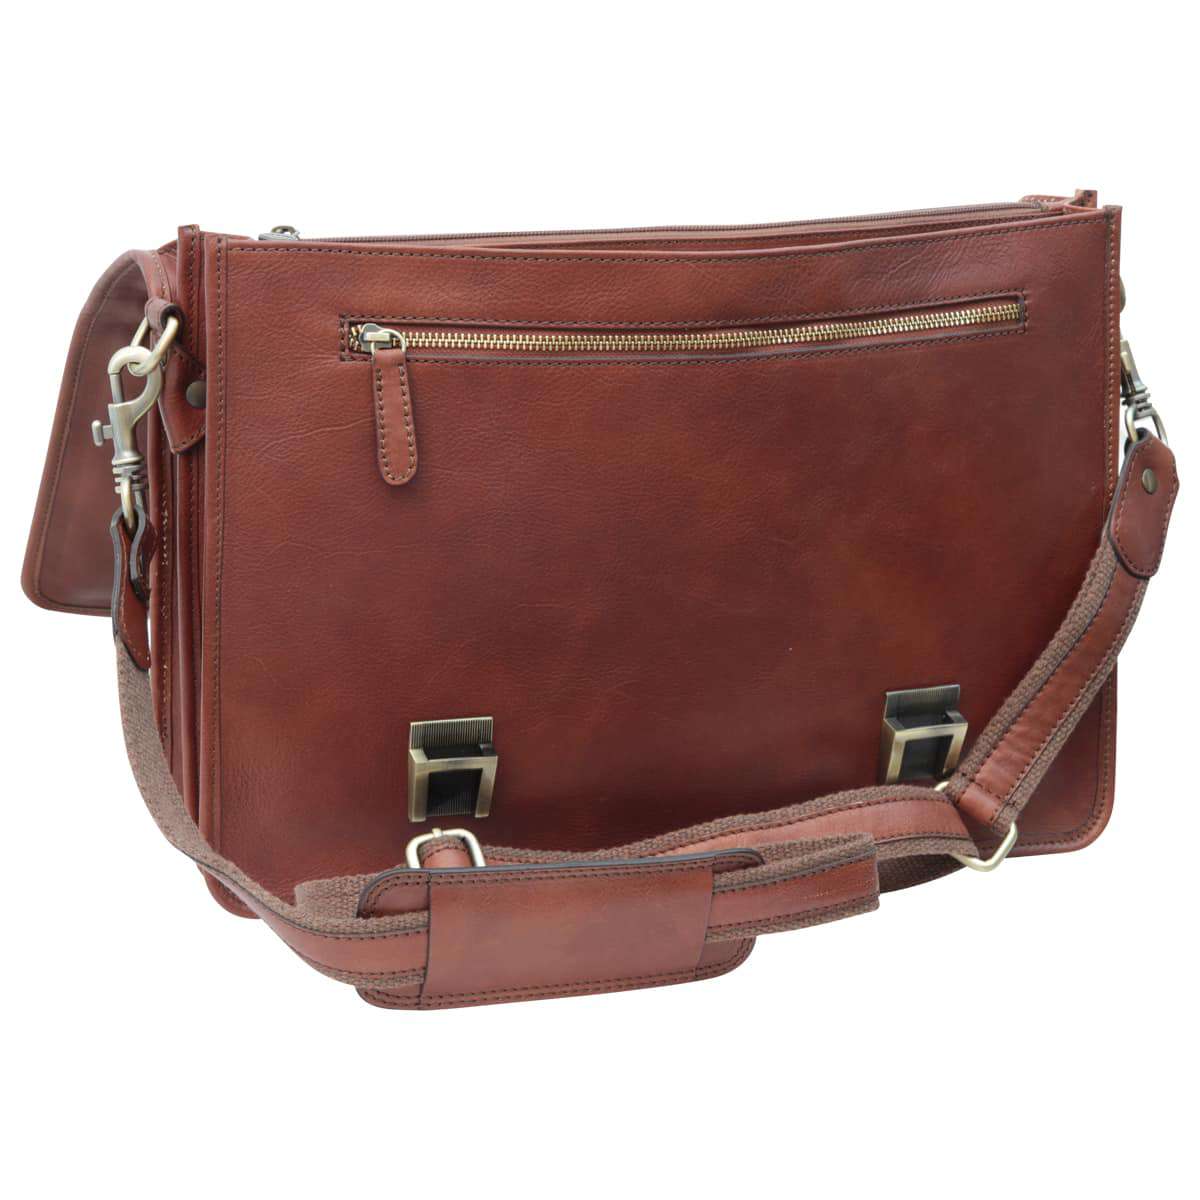 Soft Calfskin Leather Briefcase with shoulder strap - Brown | 030991MA | EURO | Old Angler Firenze